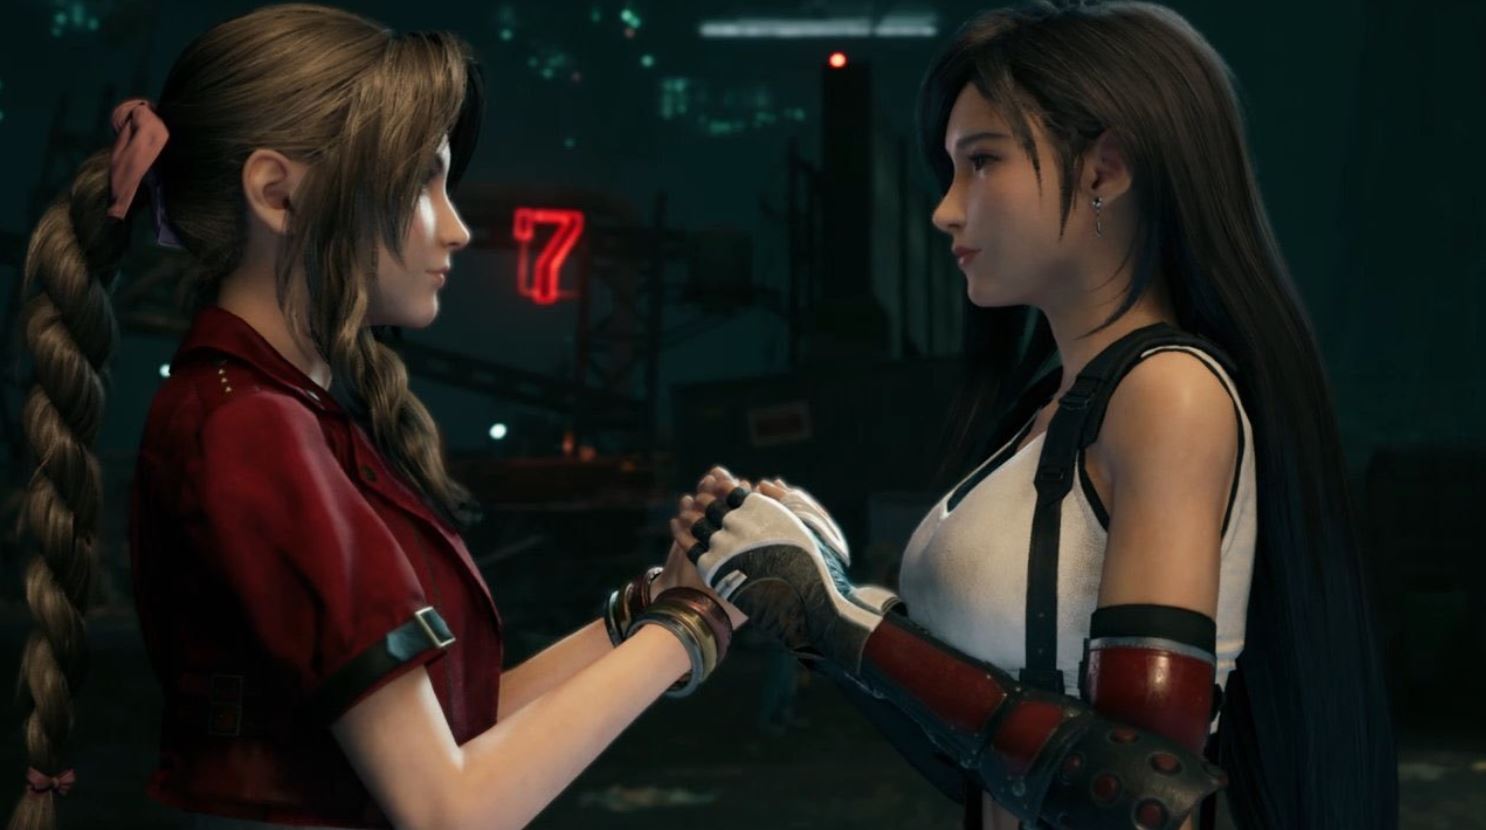 Thanks For The Aerith Tifa Ff7 Remake Gayming Magazine